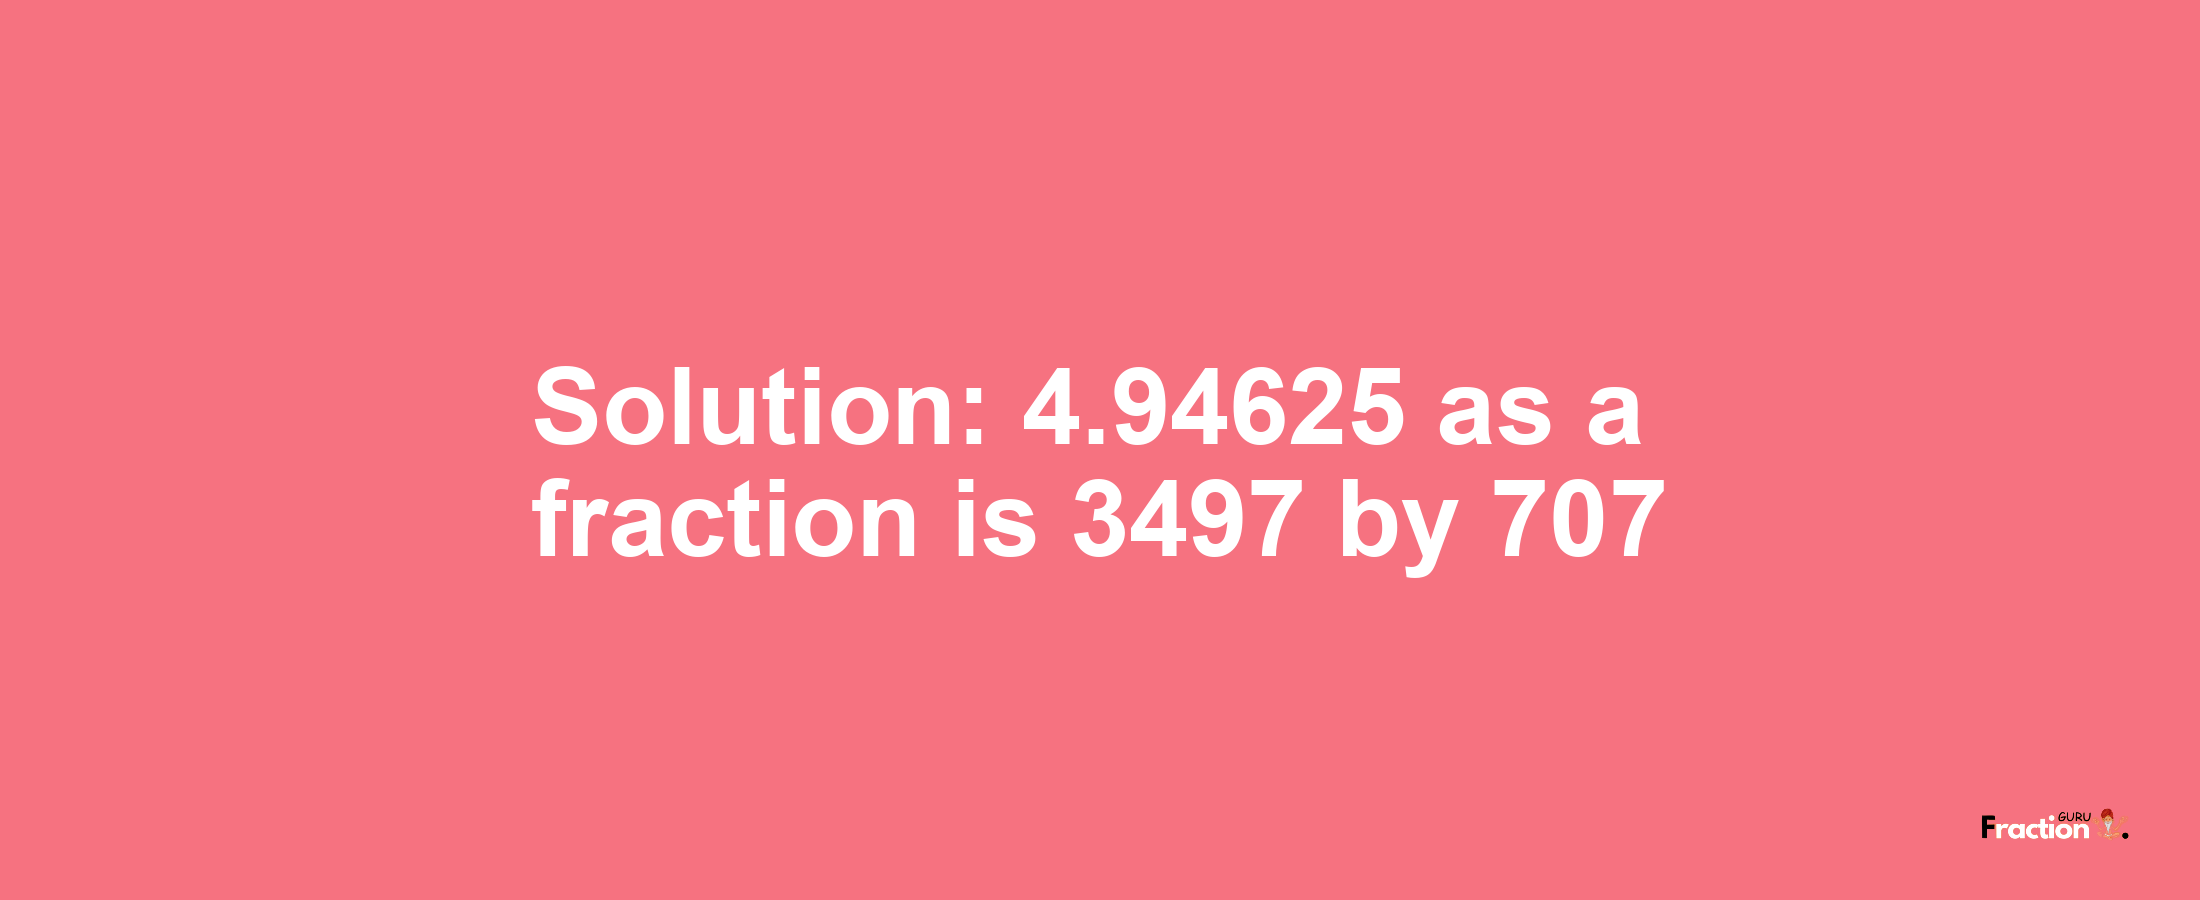 Solution:4.94625 as a fraction is 3497/707